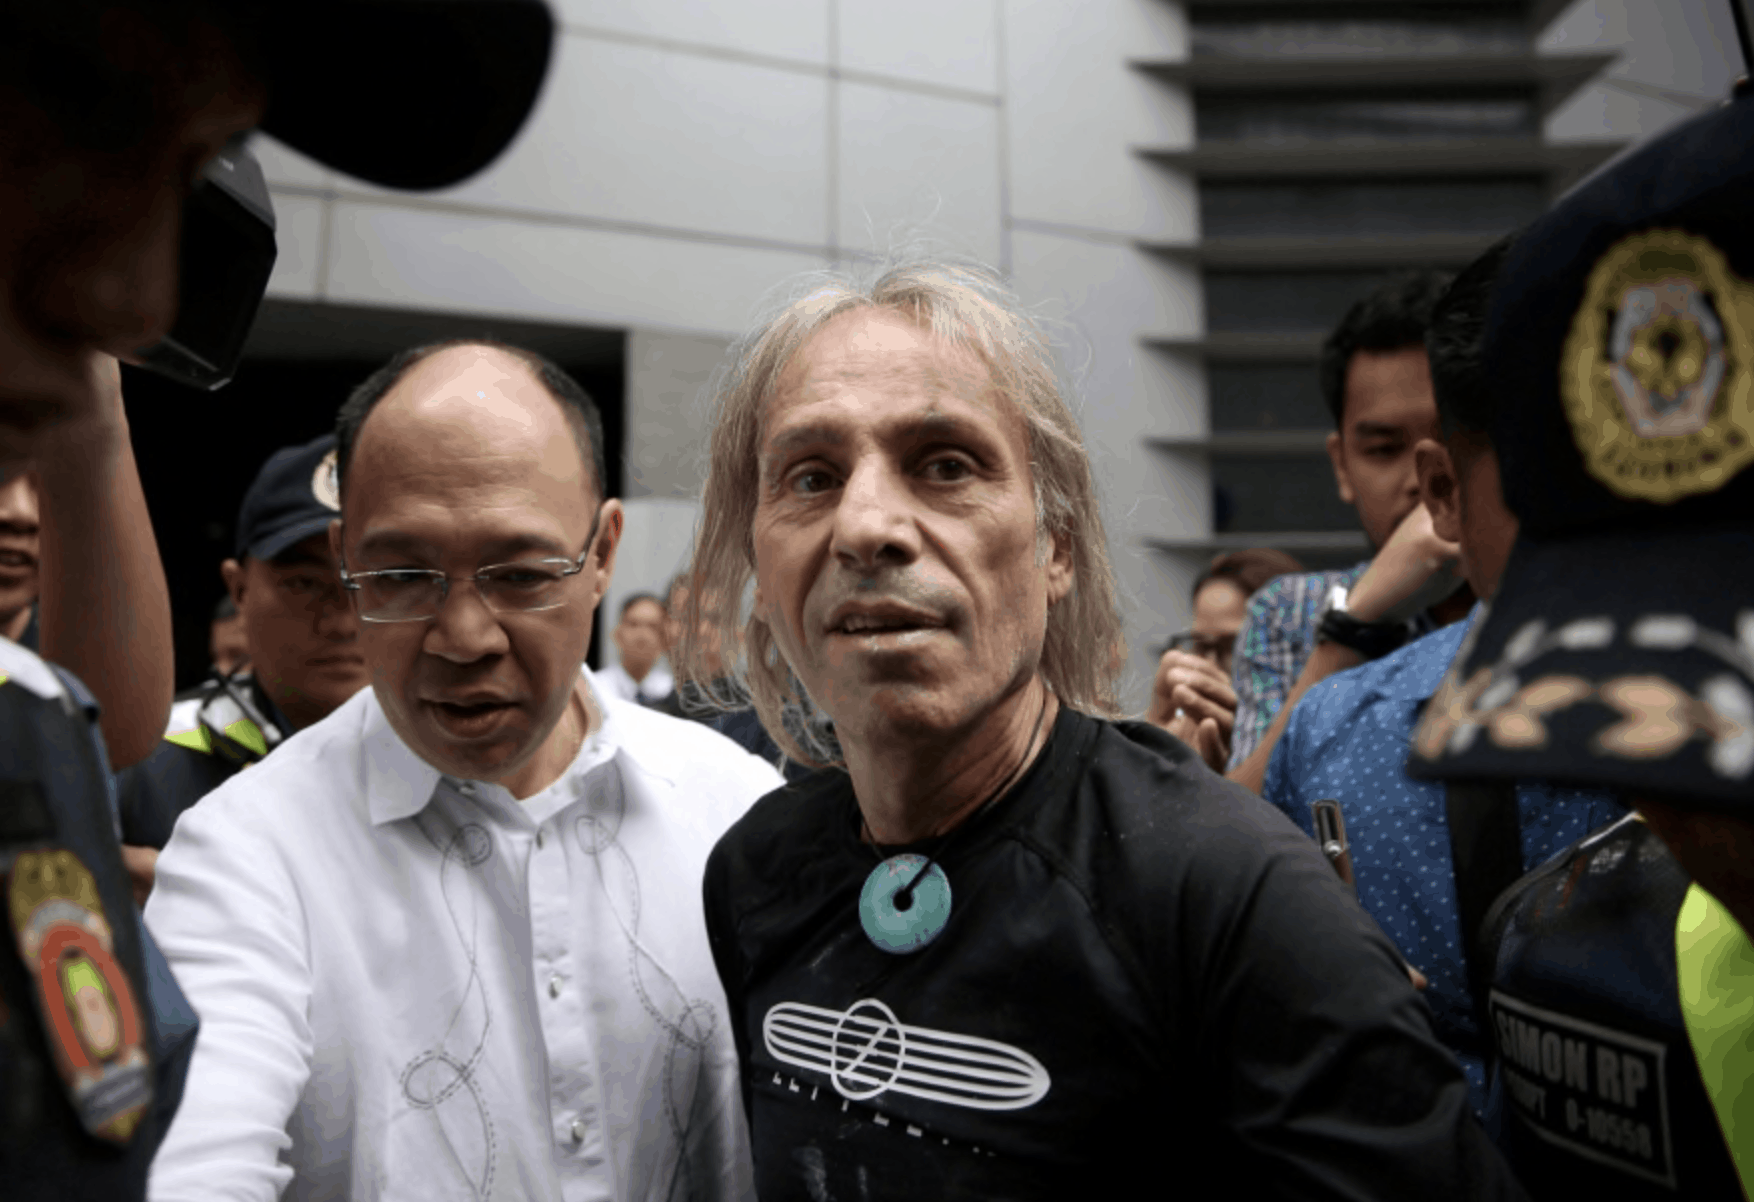 Alain Robert, The French Spiderman Was Arrested For Scaling a 47-Storey Building In The Philippines